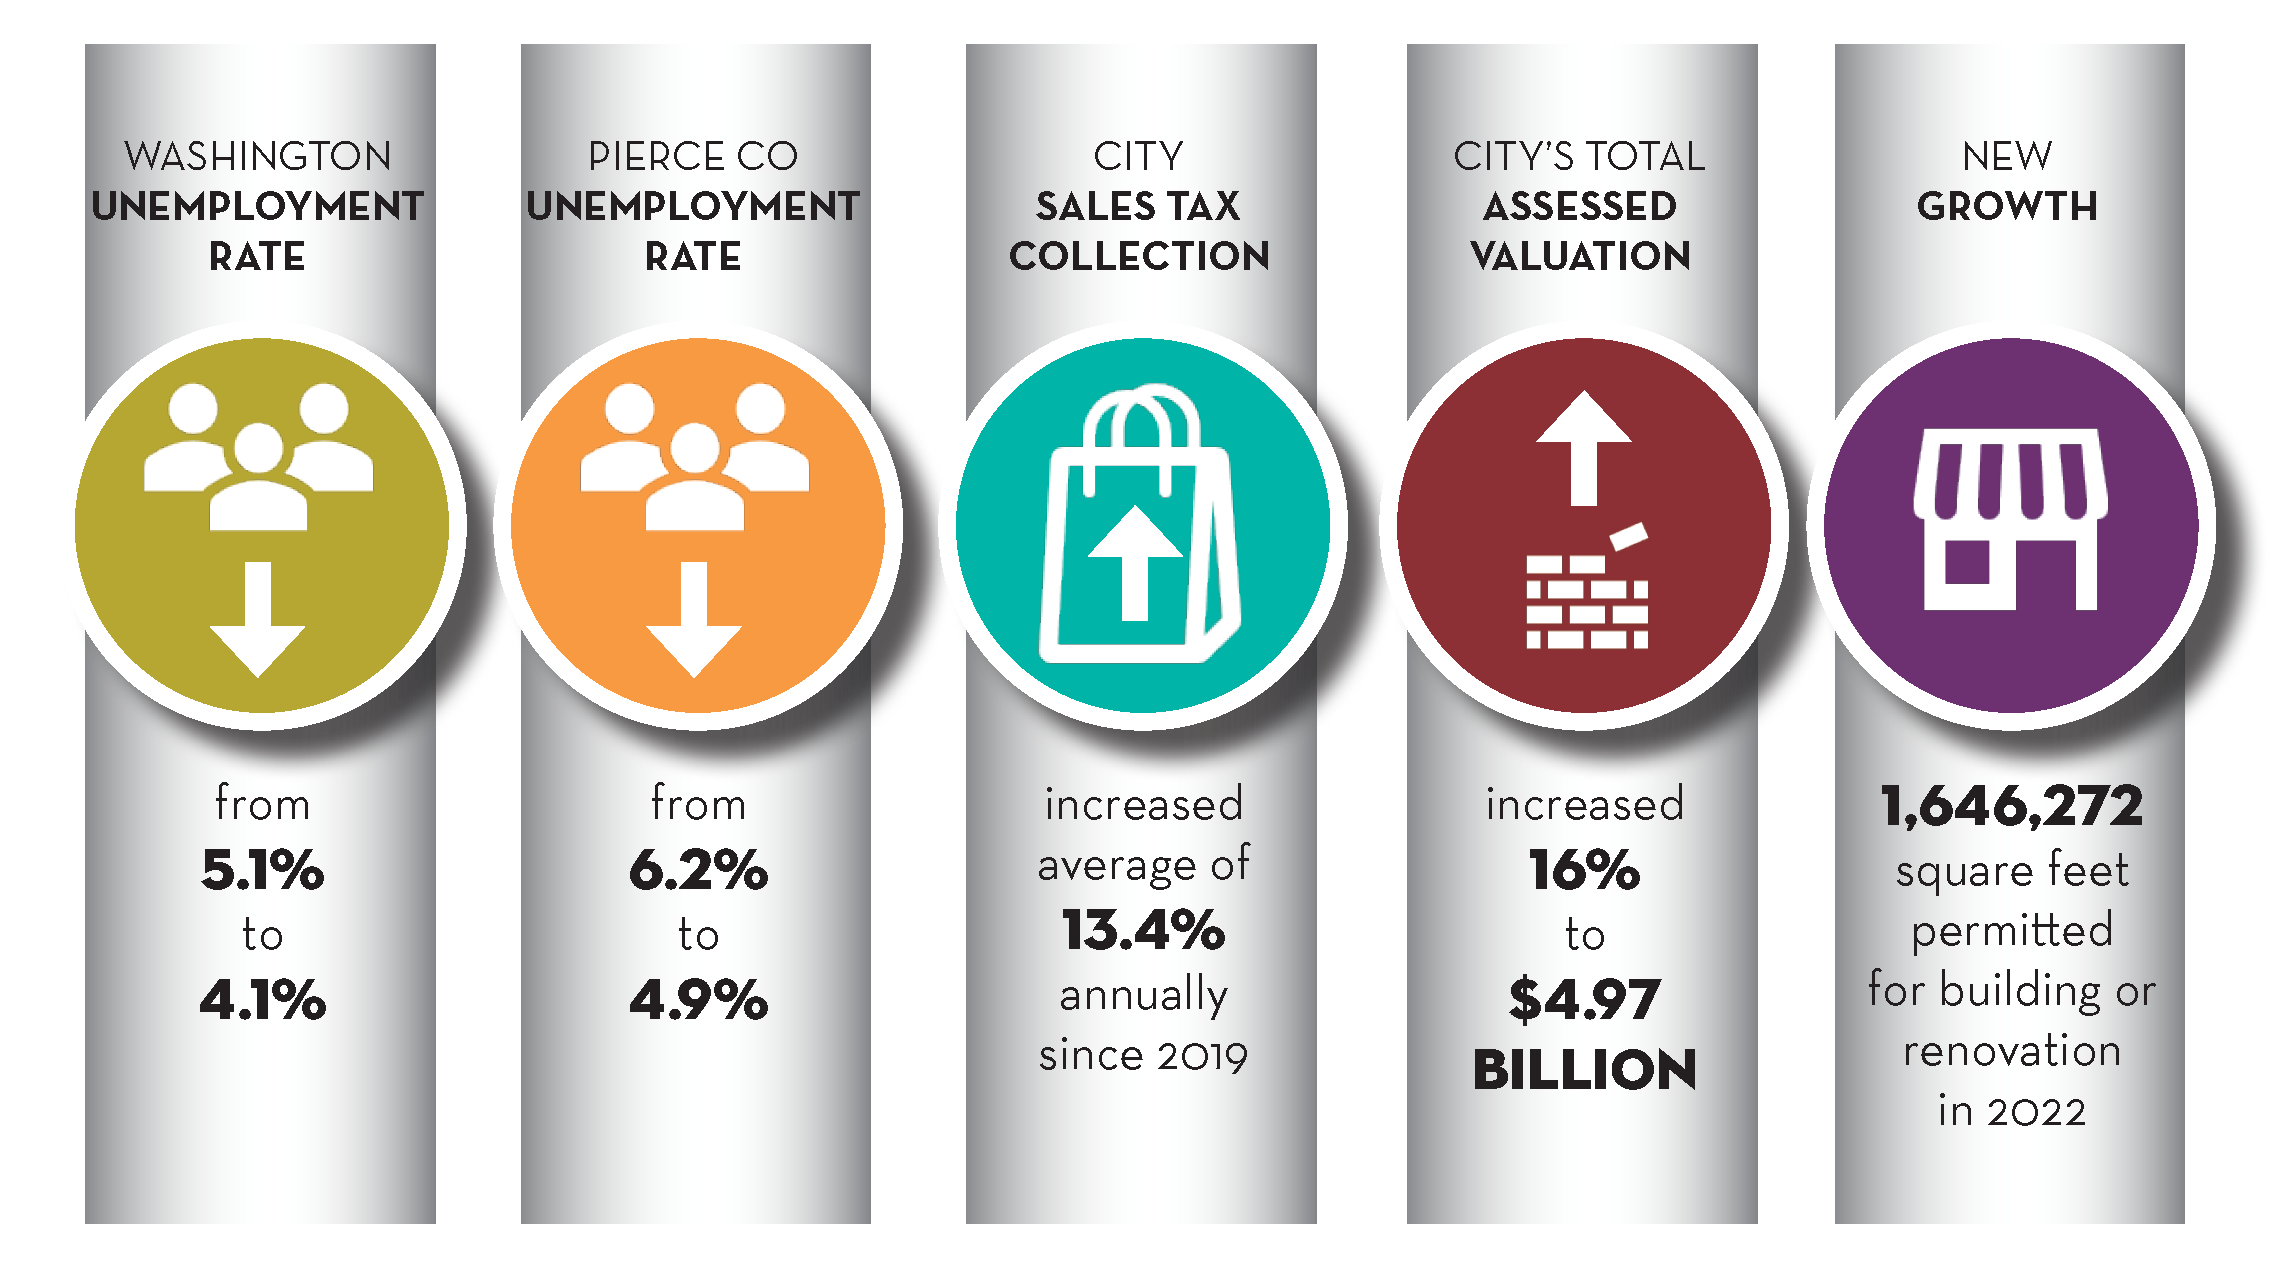 Graphic showing statistics for the local economy including the Washington unemployment rate going from 5.1% to 4.1%, Pierce County unemployment rate going from 6.2% to 4.9%, city sales tax collection increased an average of 13.4% annually since 2019, city's total assessed valuation increased 16% to $4.97 billion and with new growth, 1,646,272 square feet permitted for building or renovation in 2022. 